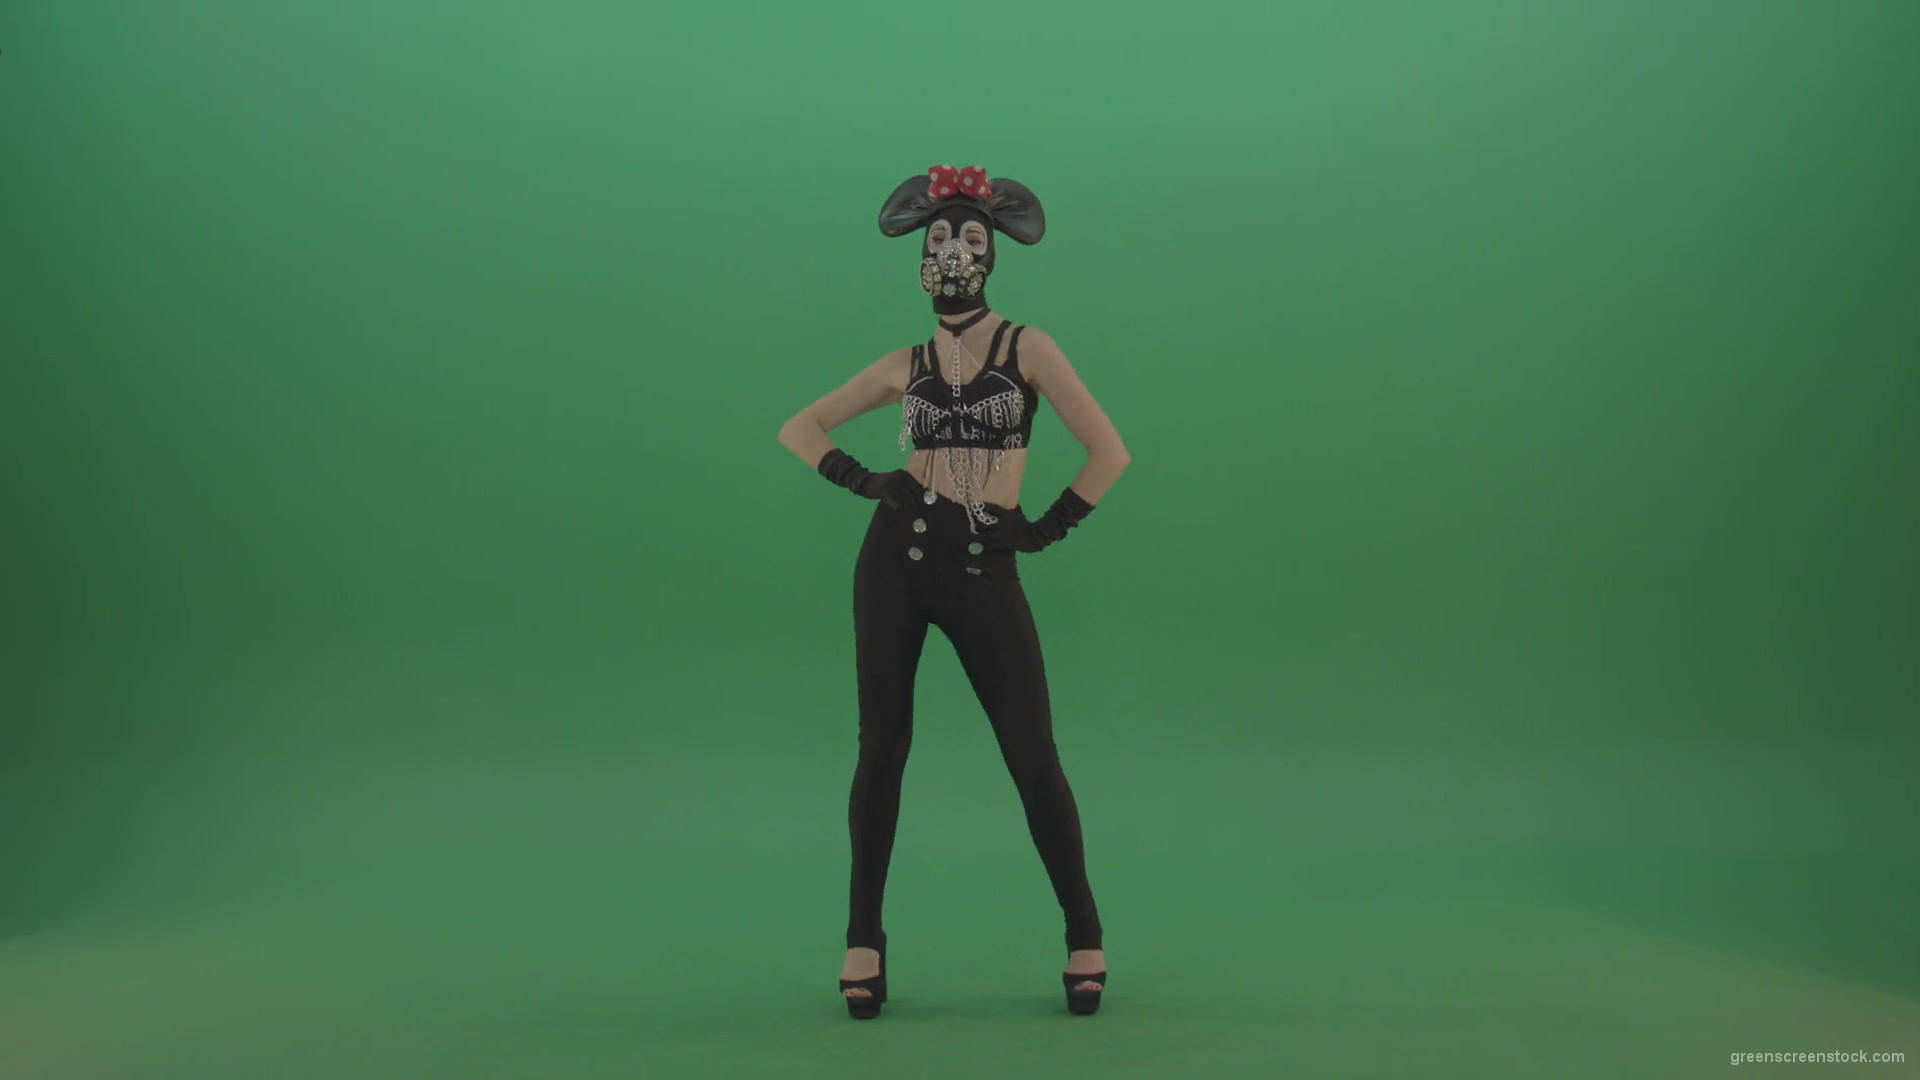 Full-size-strip-girl-in-mouse-costume-and-mask-shaking-ass-and-dancing-on-green-screen-1920_008 Green Screen Stock